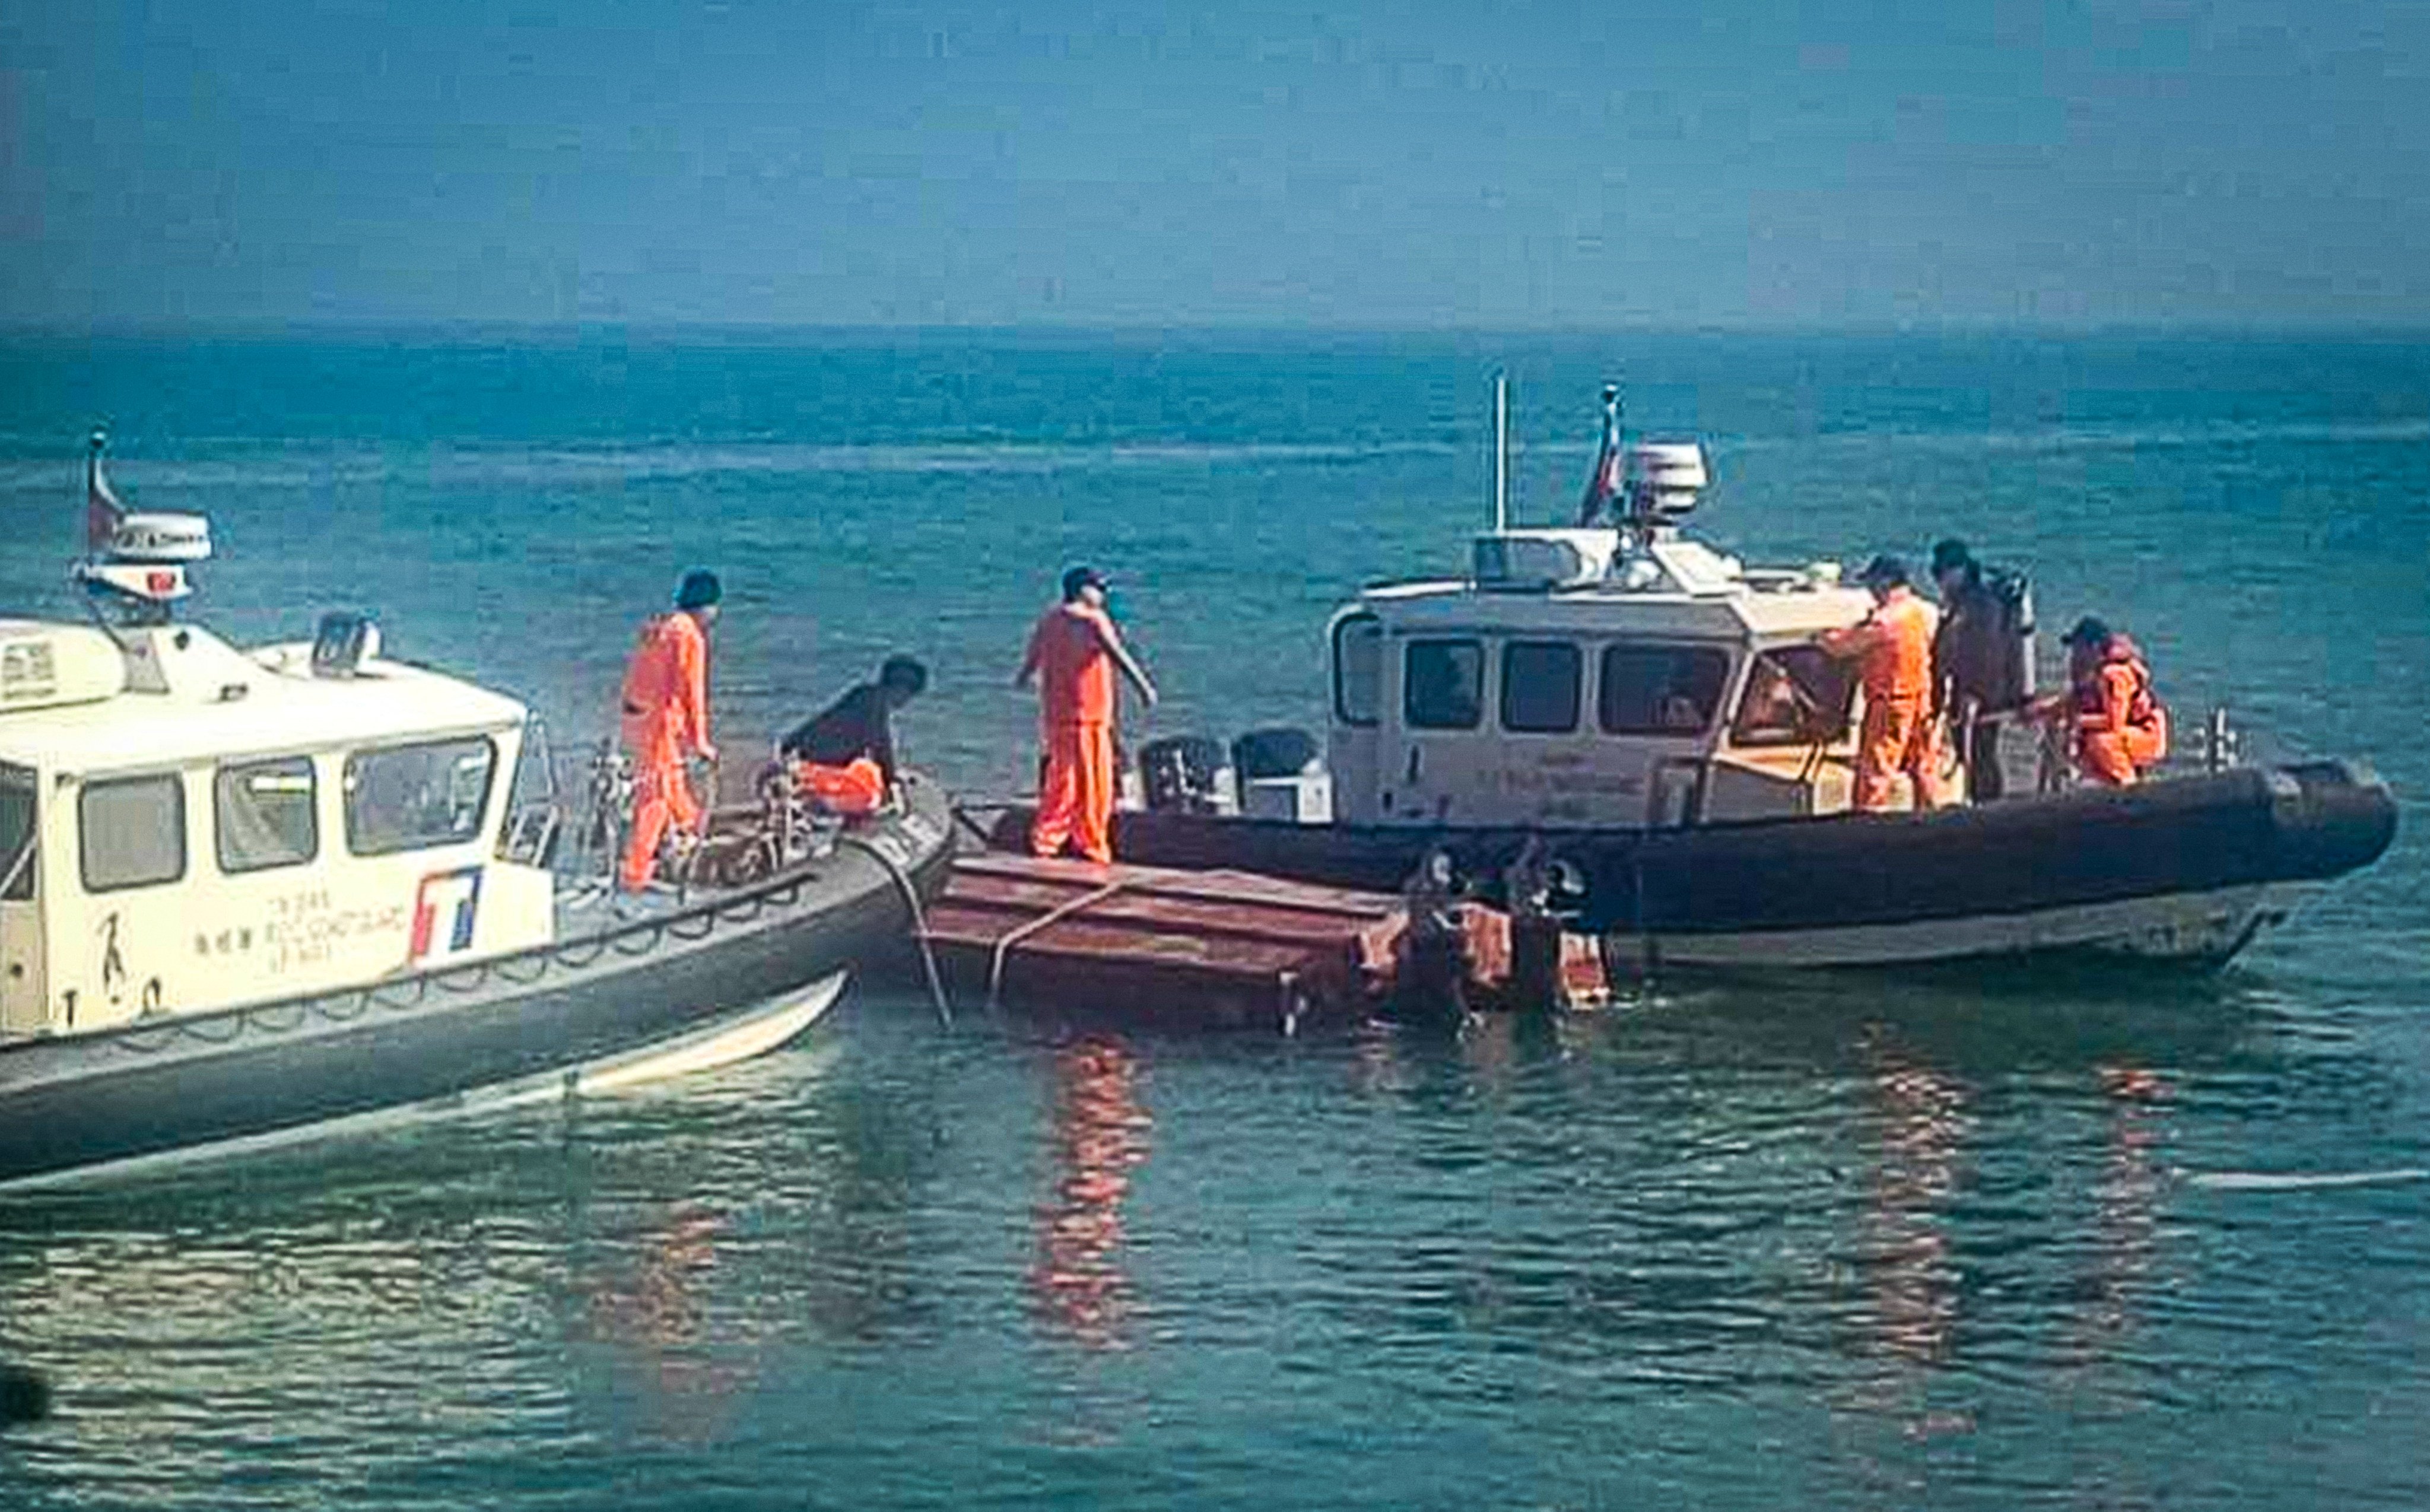 After a February 14 chase by Taiwan coastguard of a mainland fishing vessel ended with the tragic deaths of two men, observers say it highlights the need for more open lines of communication between Beijing and Taipei. Photo: Coast Guard Administration’s Kinmen-Matsu-Penghu Branch